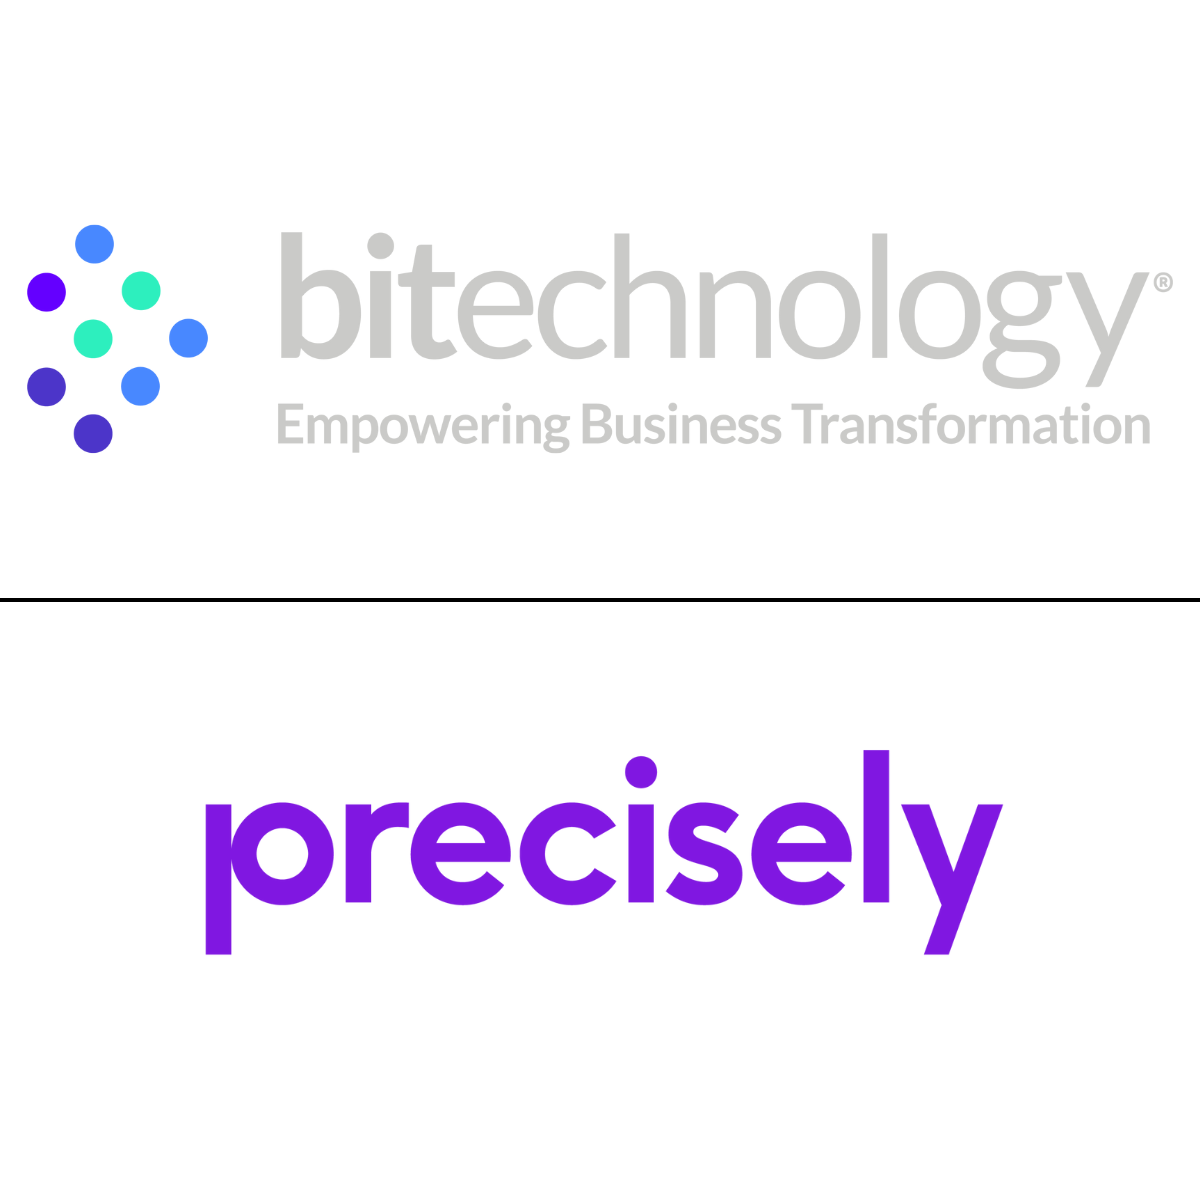 bitechnology and precisely